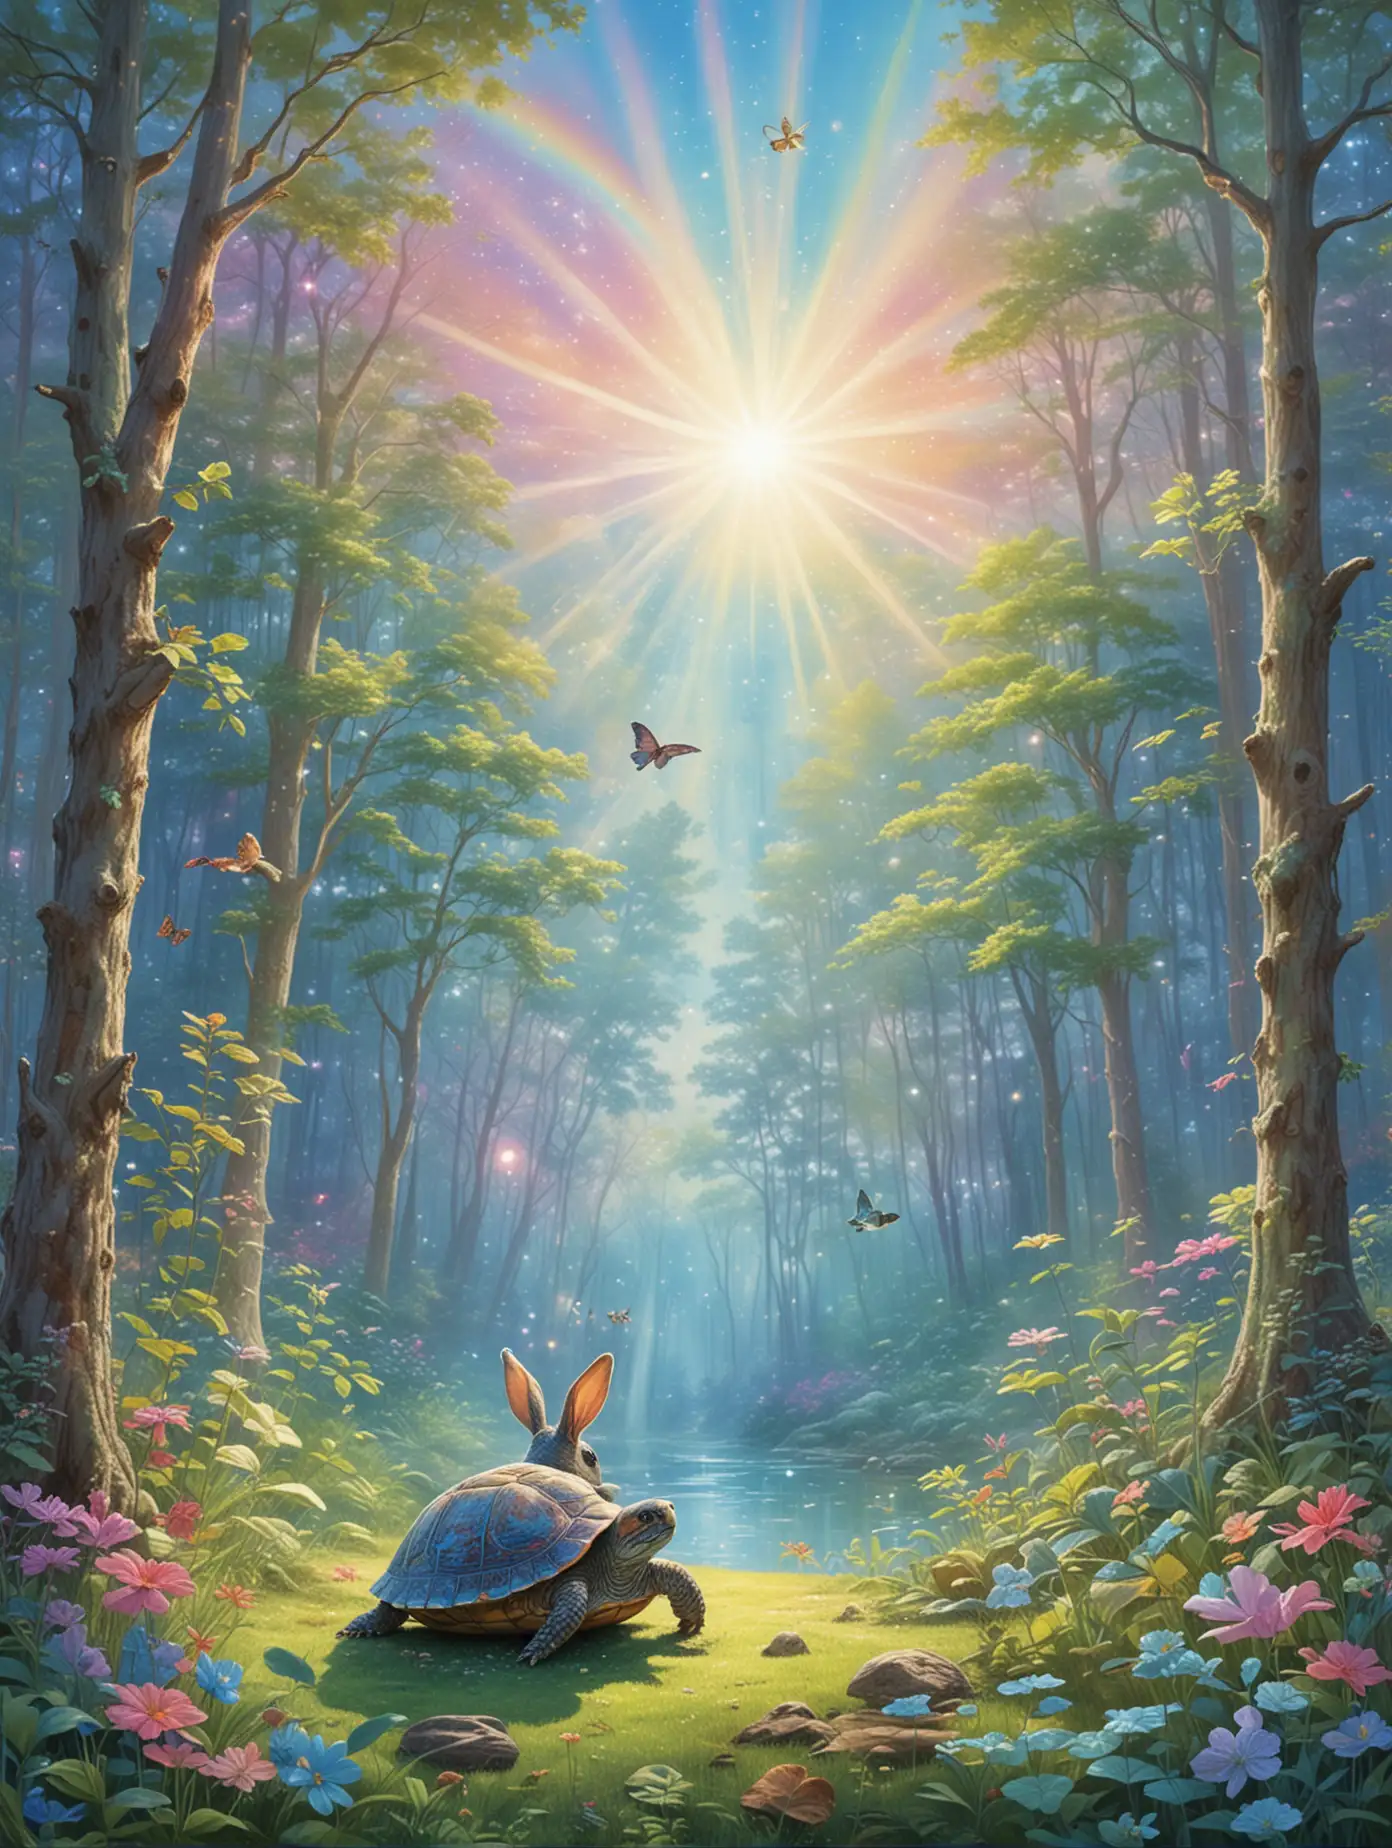 Tranquil Pastel Rainbow Forest with Meditating Bunny and Turtle Childrens Book Illustration Poster